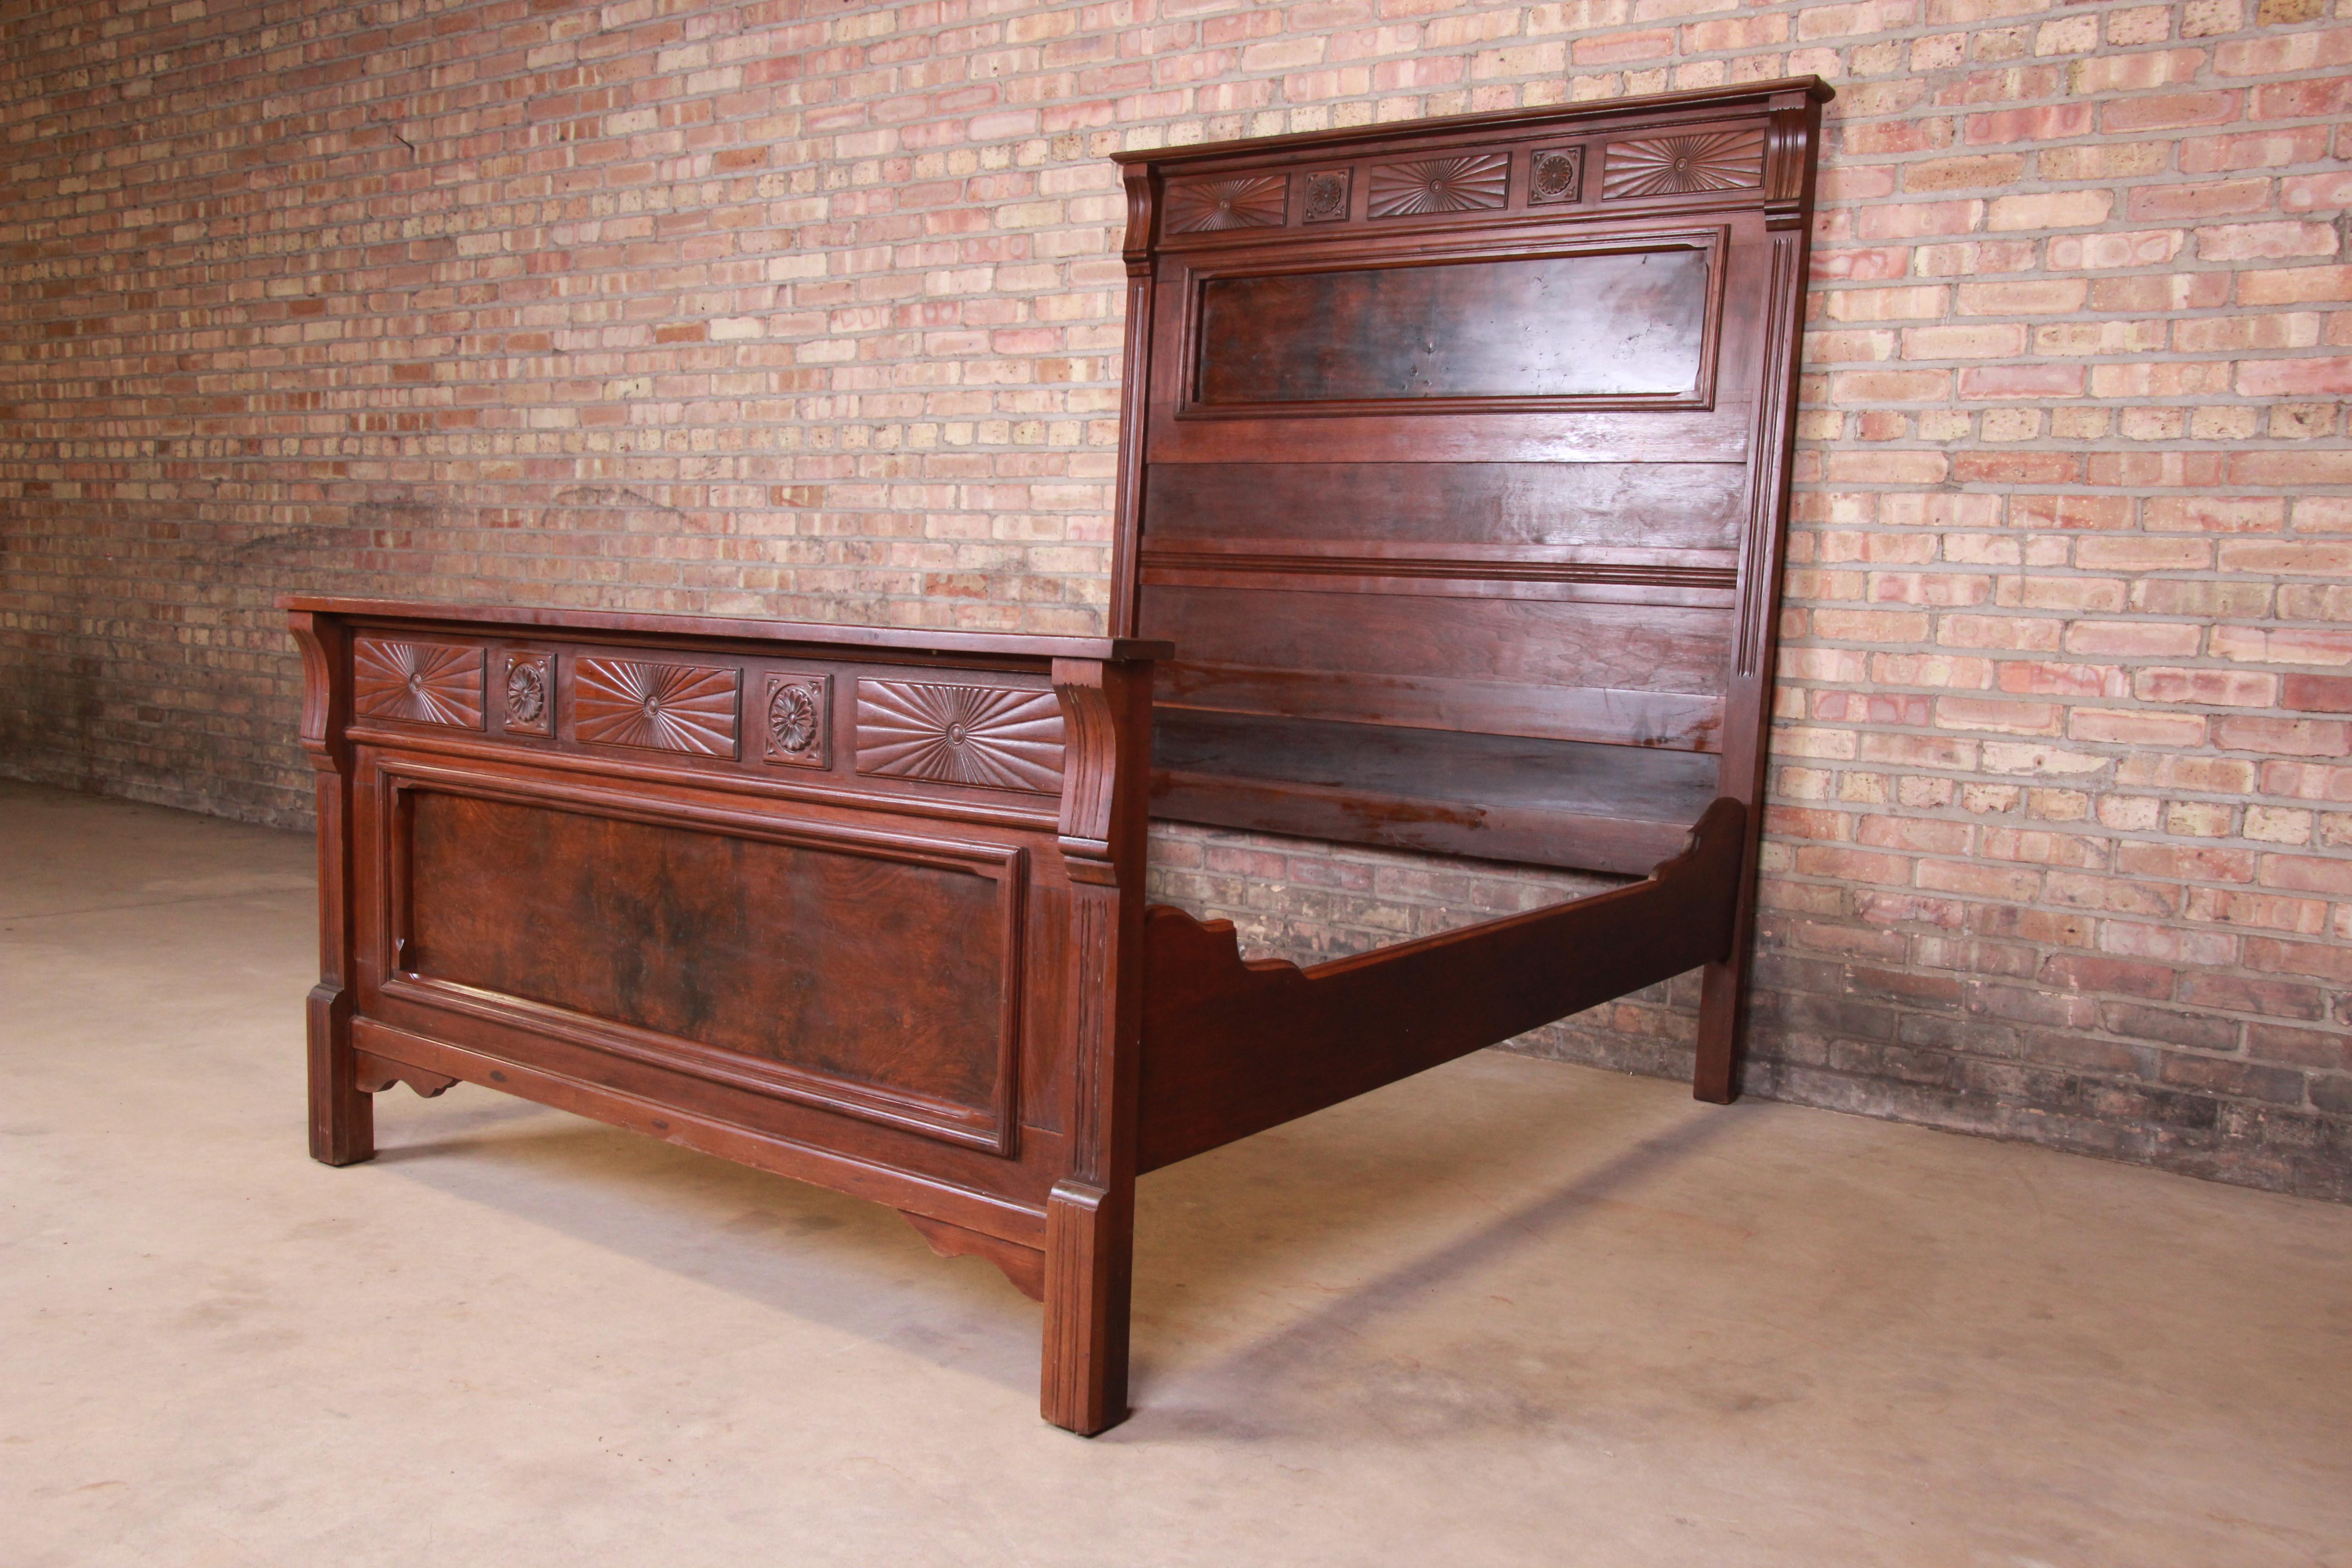 A gorgeous Eastlake Victorian full size bed frame,

USA, circa 1880s

Carved solid walnut, with burled walnut panels.

Measures: 59.5